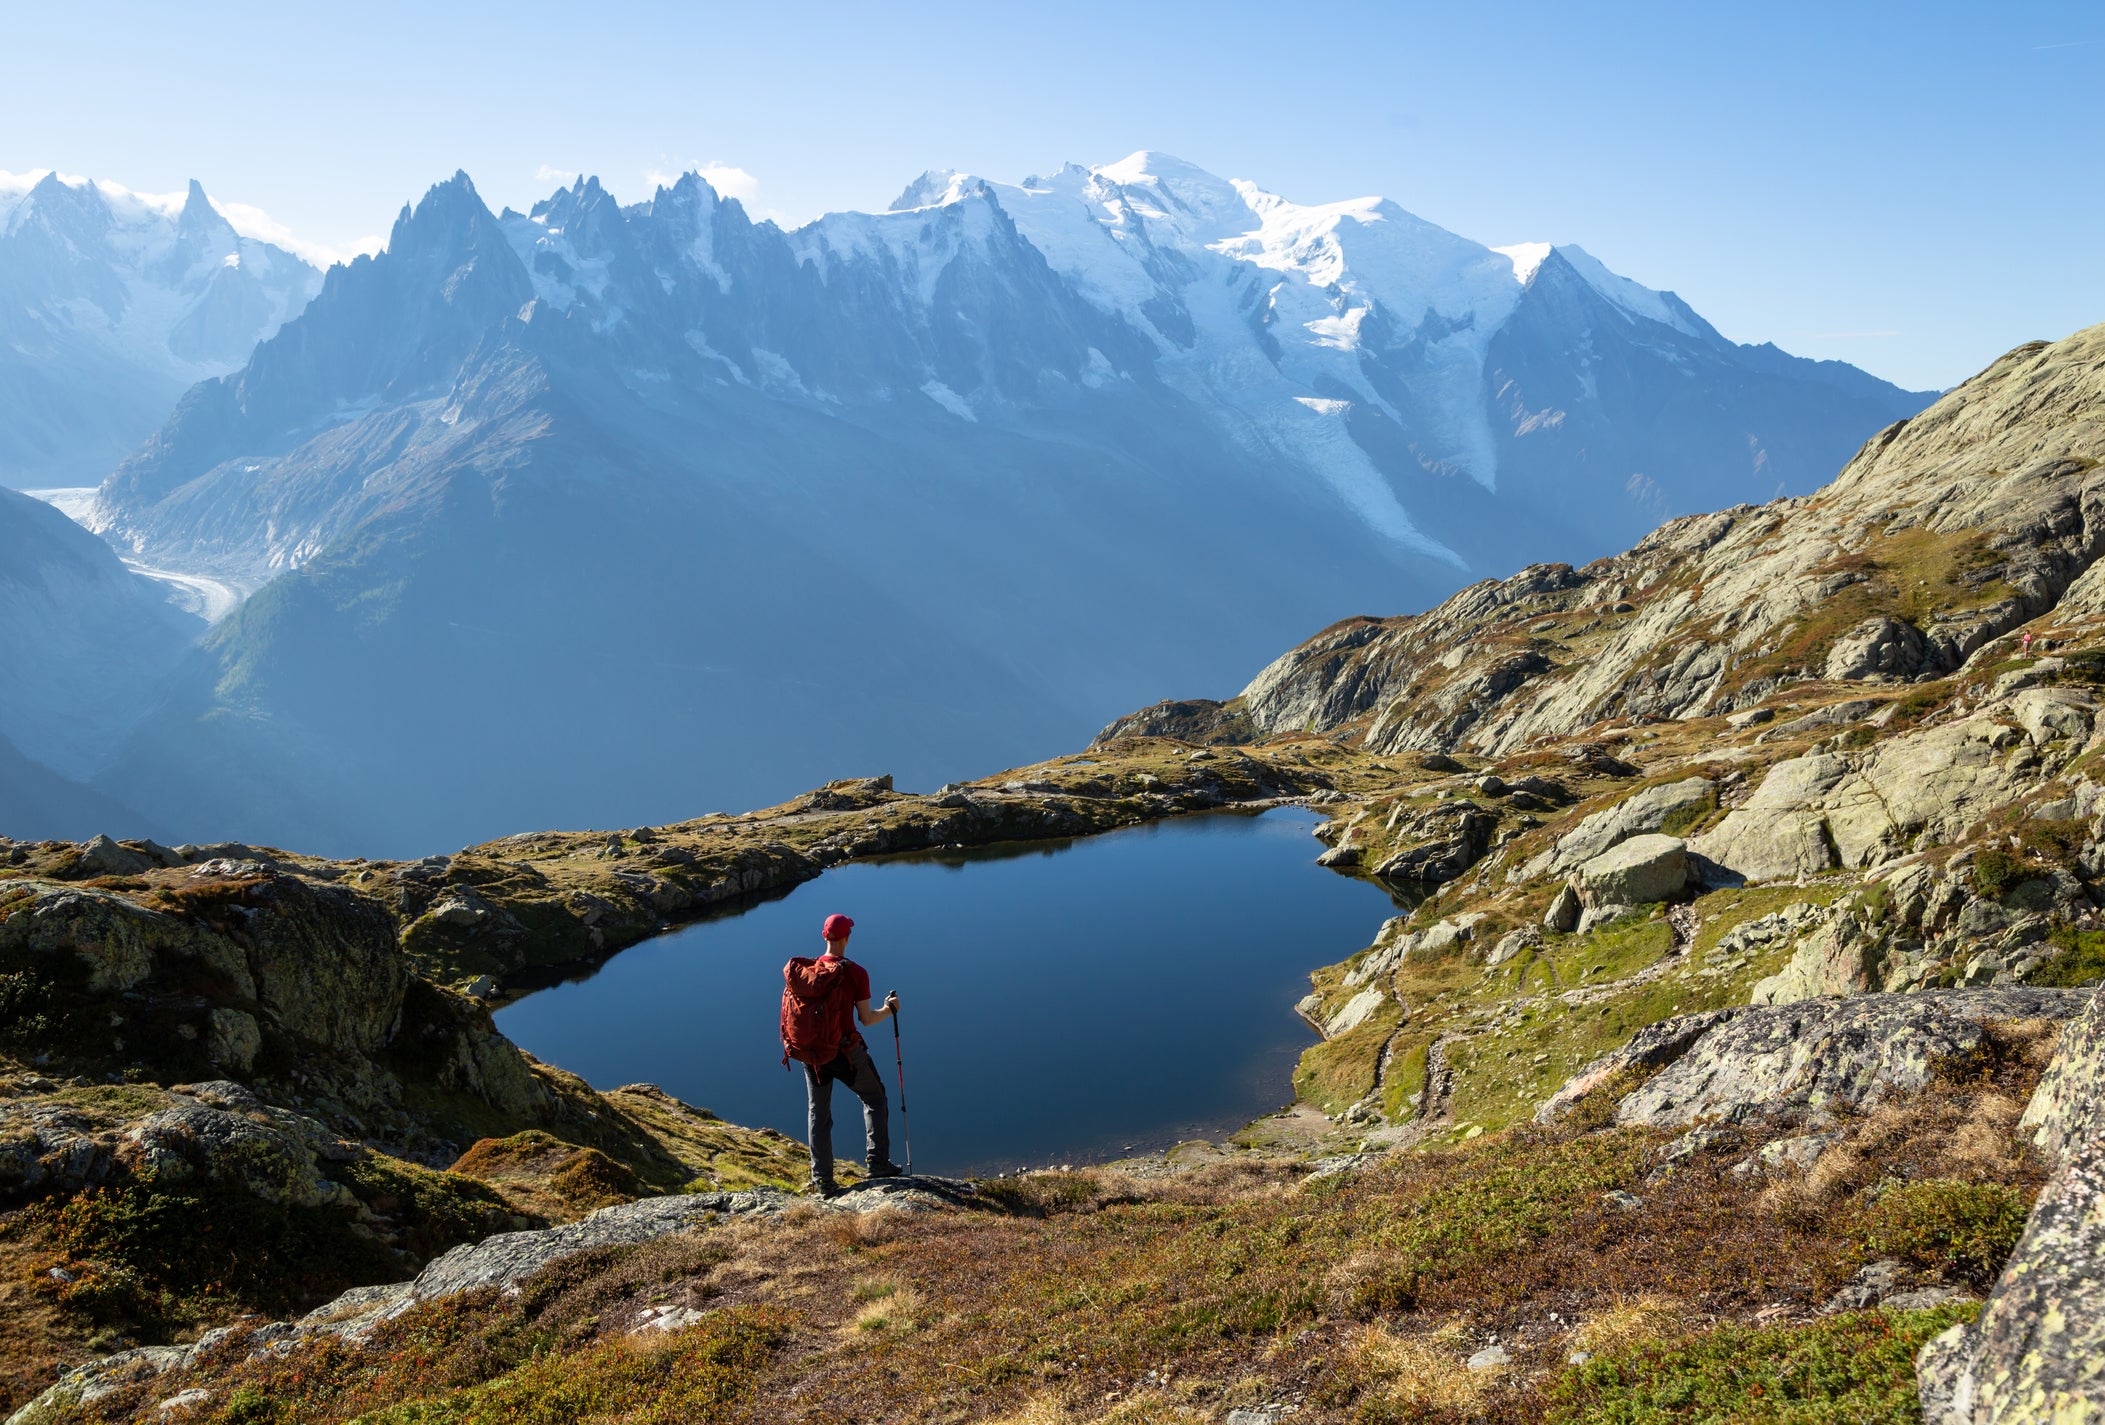 Alpine meadows, glacial lakes and steep valleys weave the foothills of Mont Blanc